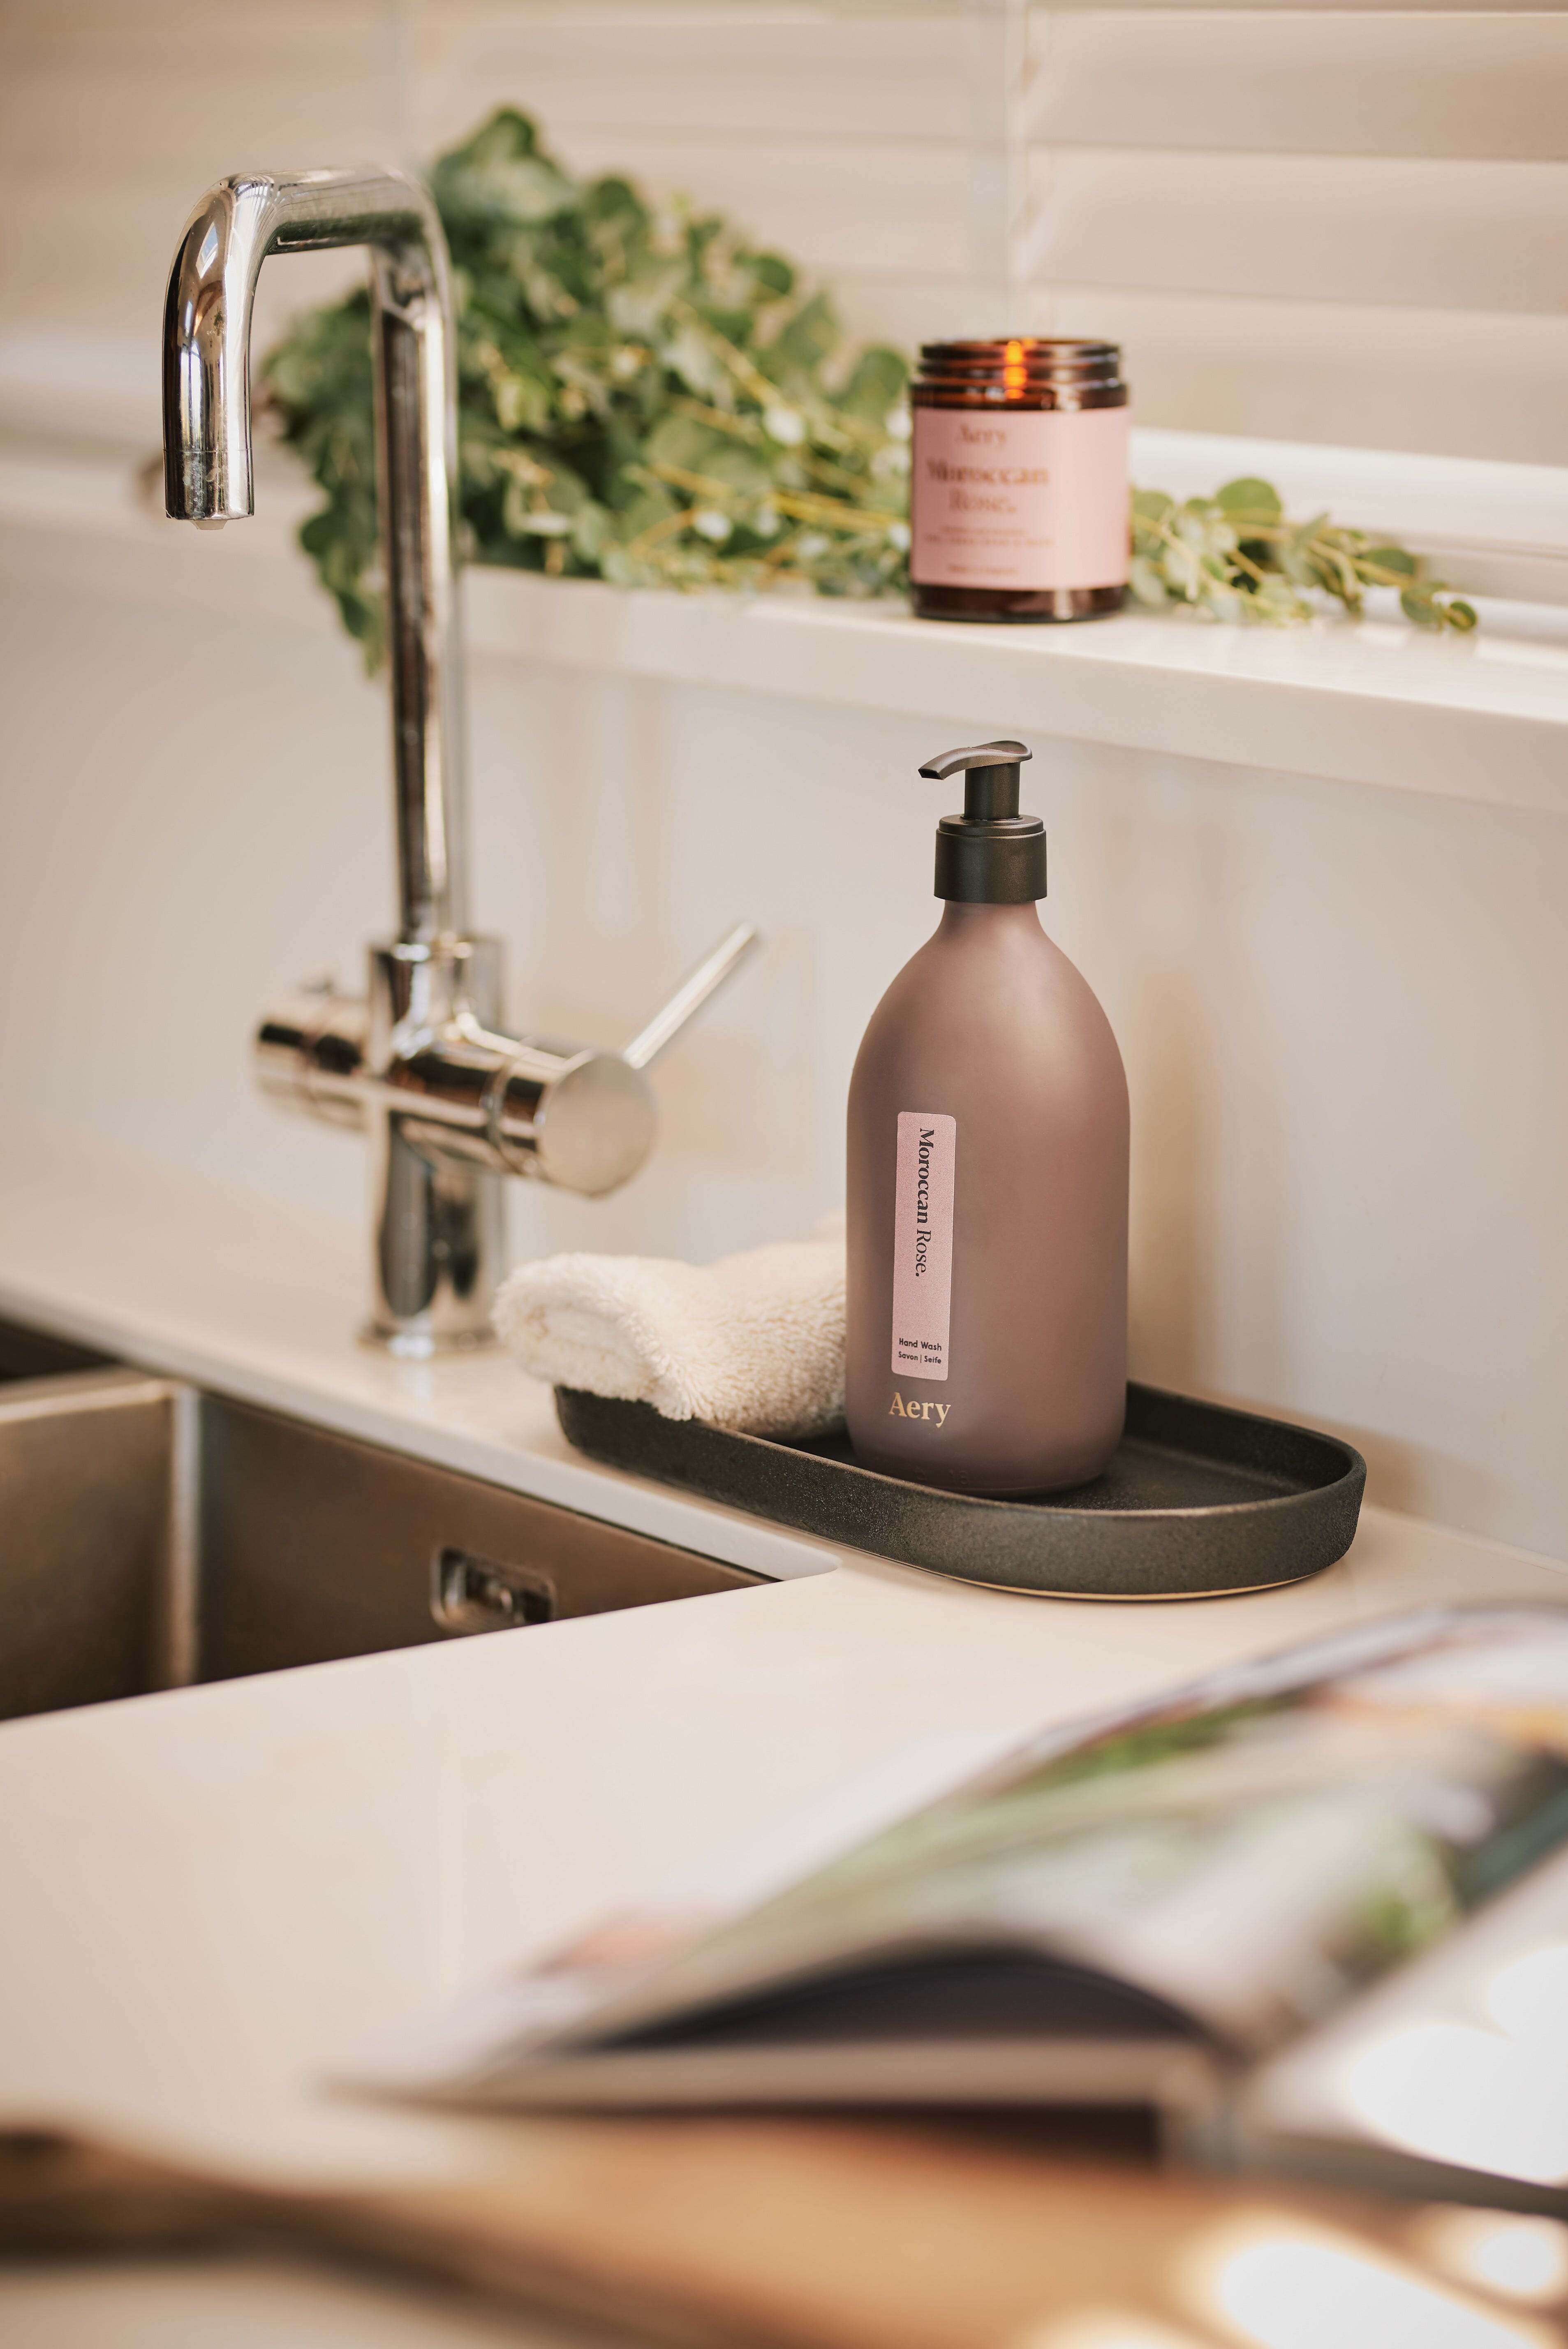 Aubergine Moroccan Rose hand wash by Aery displayed next to Moroccan rose jar candle place by the kitchen sink 